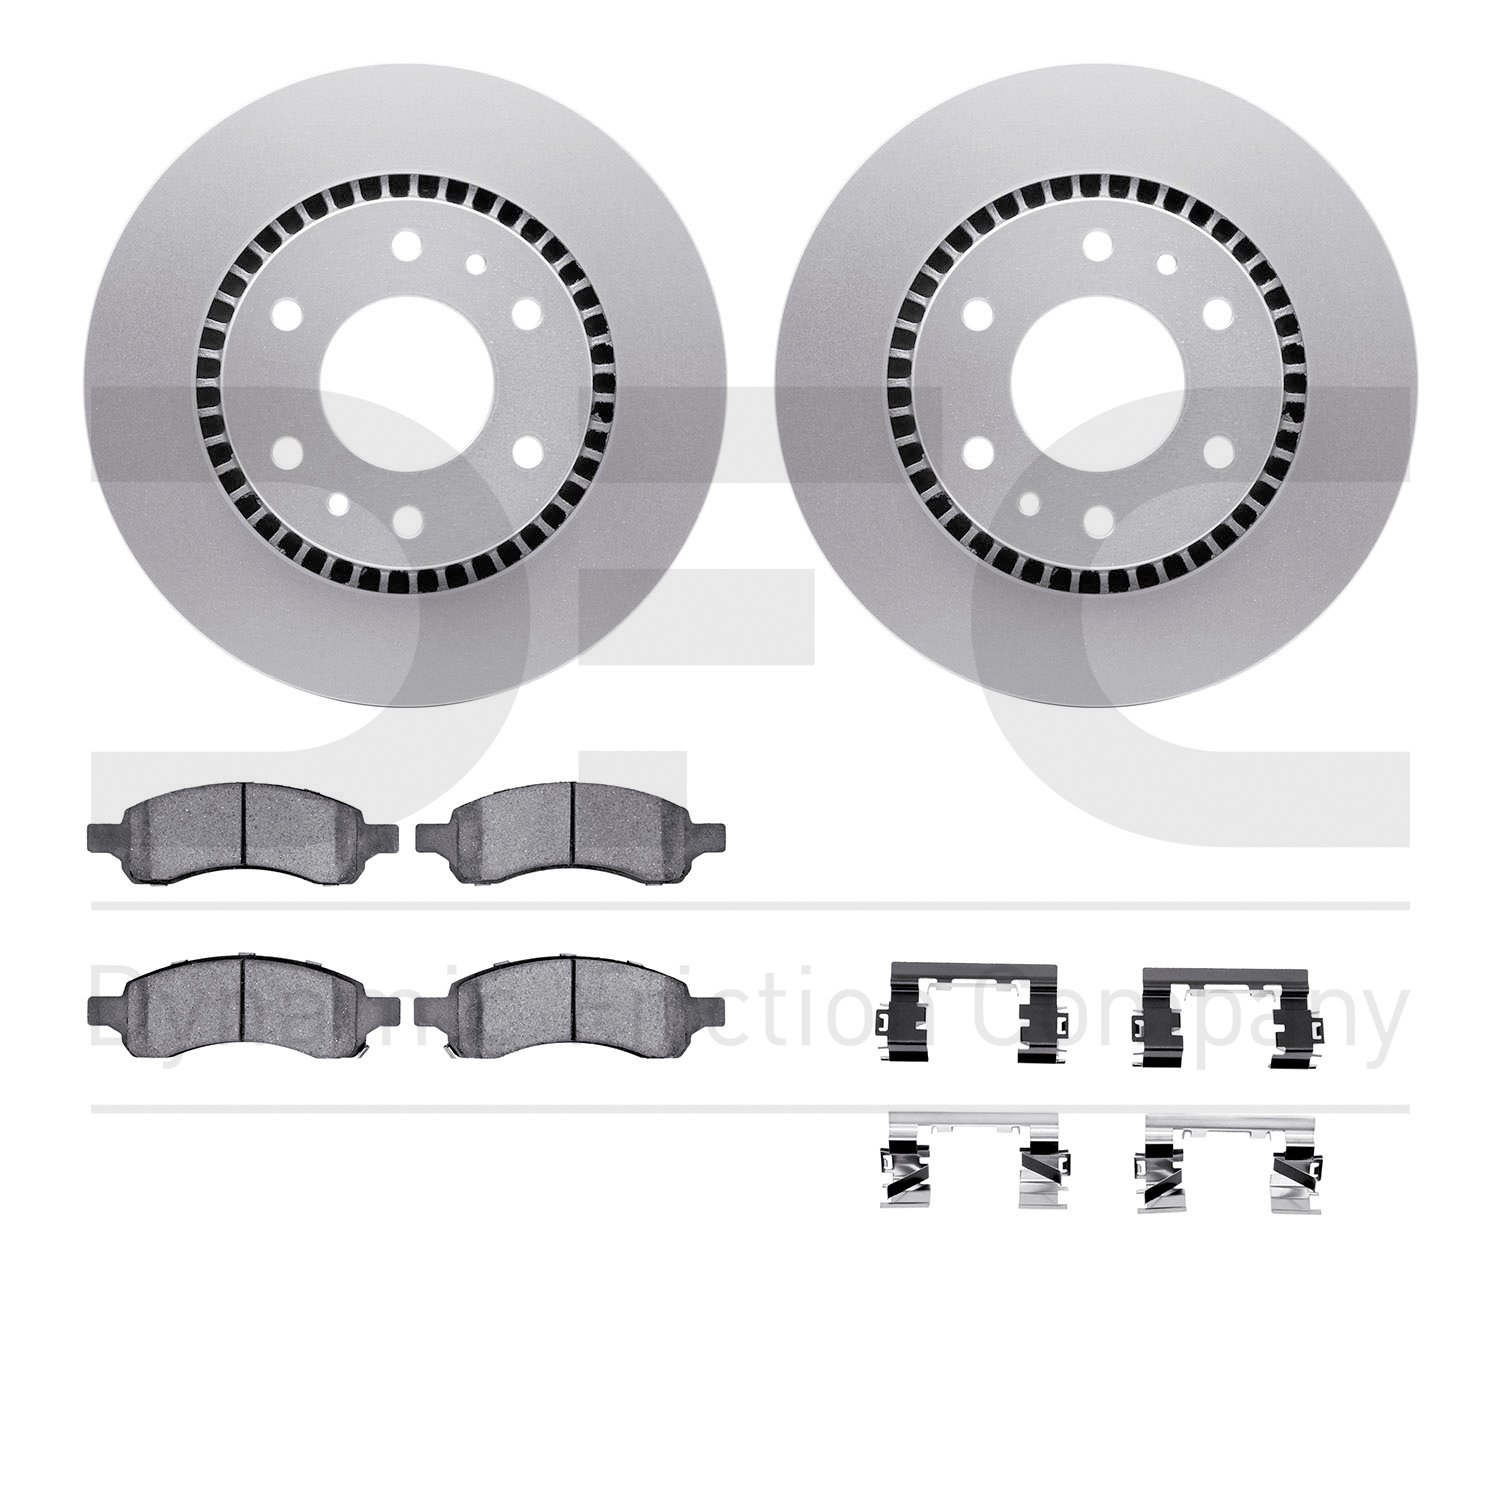 4412-48026 Geospec Brake Rotors with Ultimate-Duty Brake Pads & Hardware, 2006-2009 GM, Position: Front